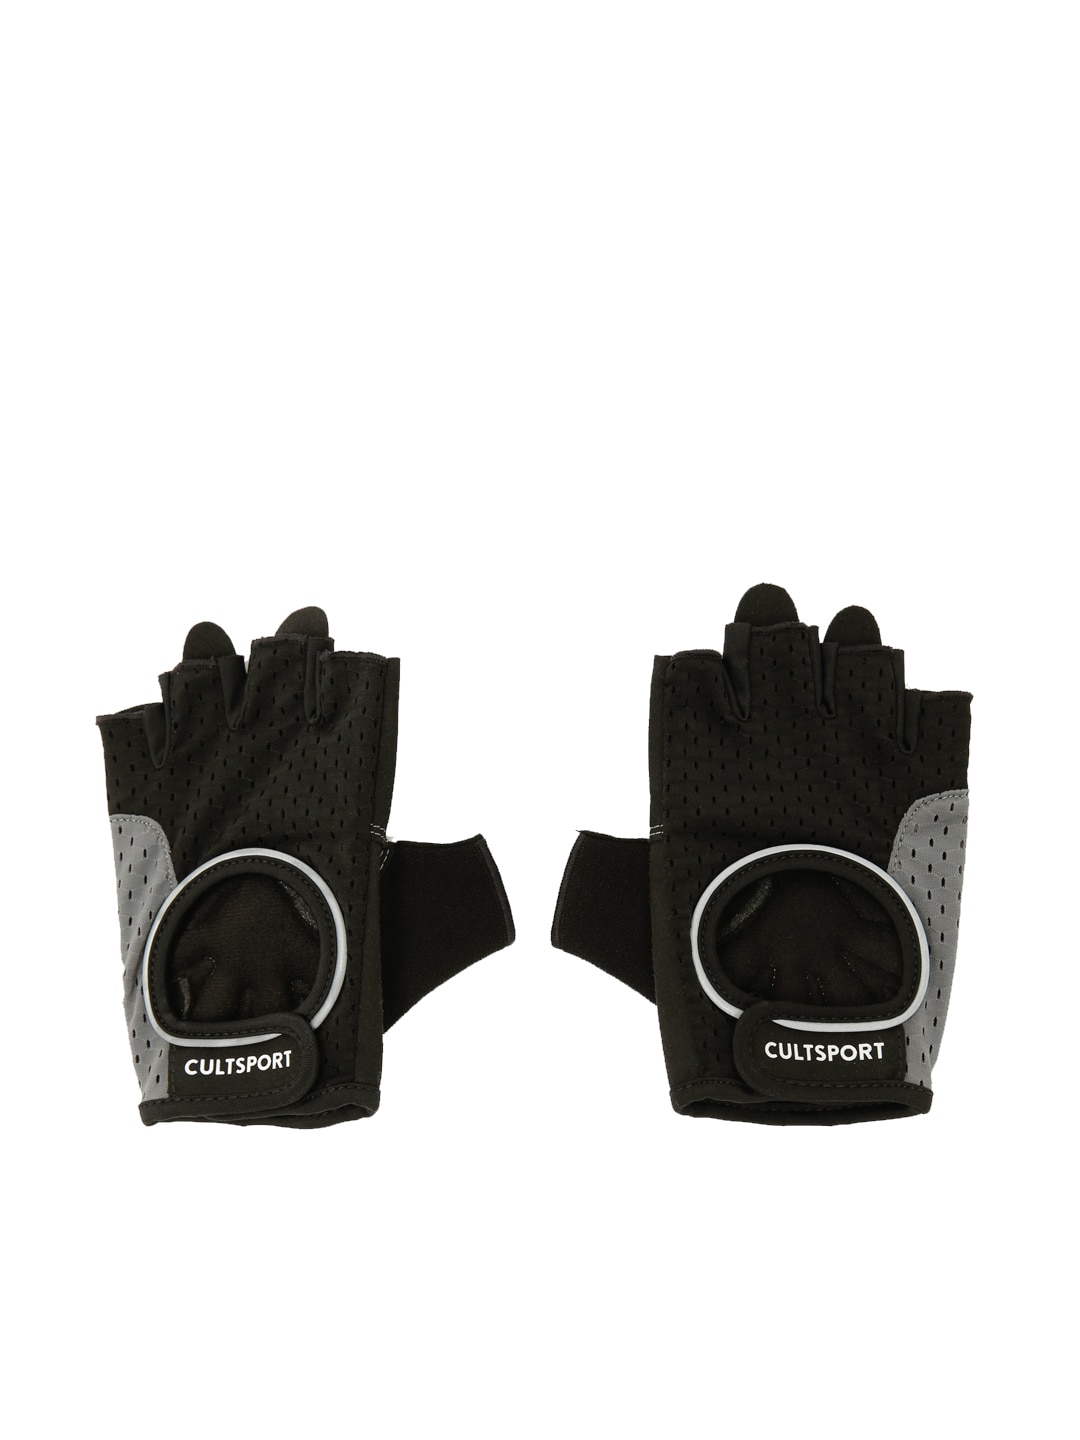 Cultsport Black & Grey Solid Training Workout Gloves Price in India